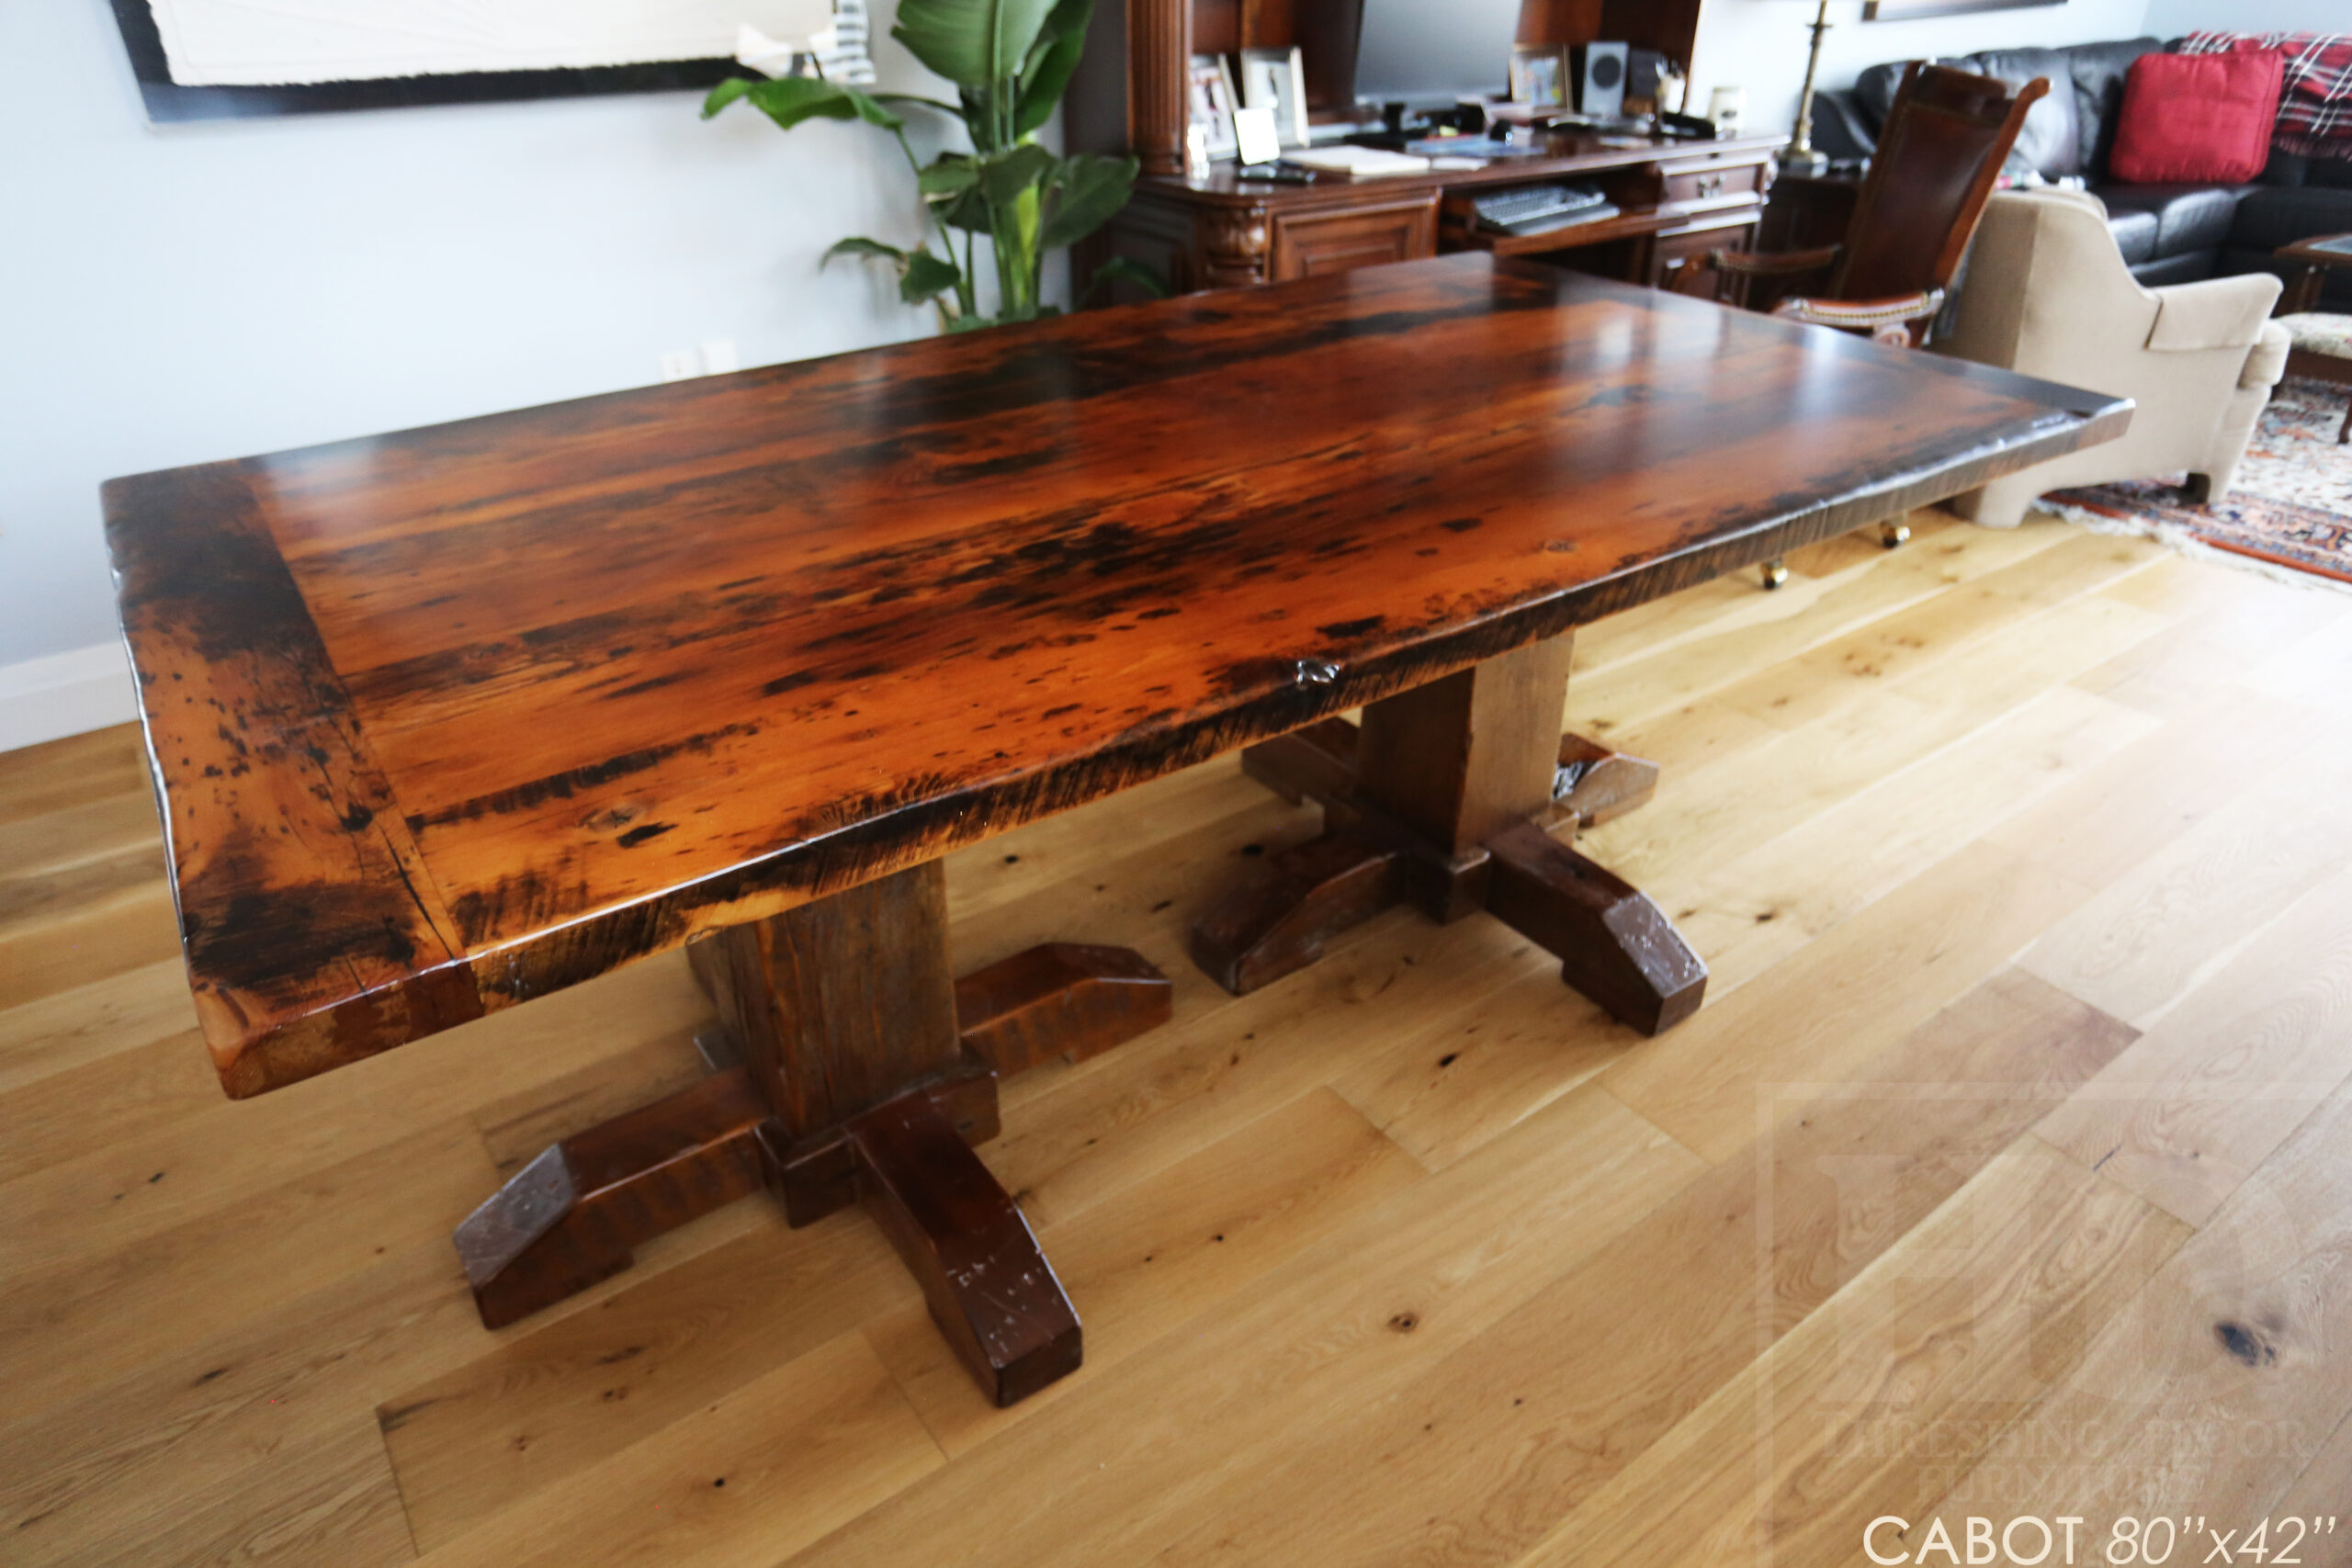 80” Reclaimed Ontario Barnwood Table we made for a Oakville, Ontario home – Double Hand Hewn Beam Posts Base  - Old Growth Hemlock Threshing Floor Construction – Original edges & distressing maintained – Bread Edge Ends - Premium epoxy + satin polyurethane finish - www.table.ca